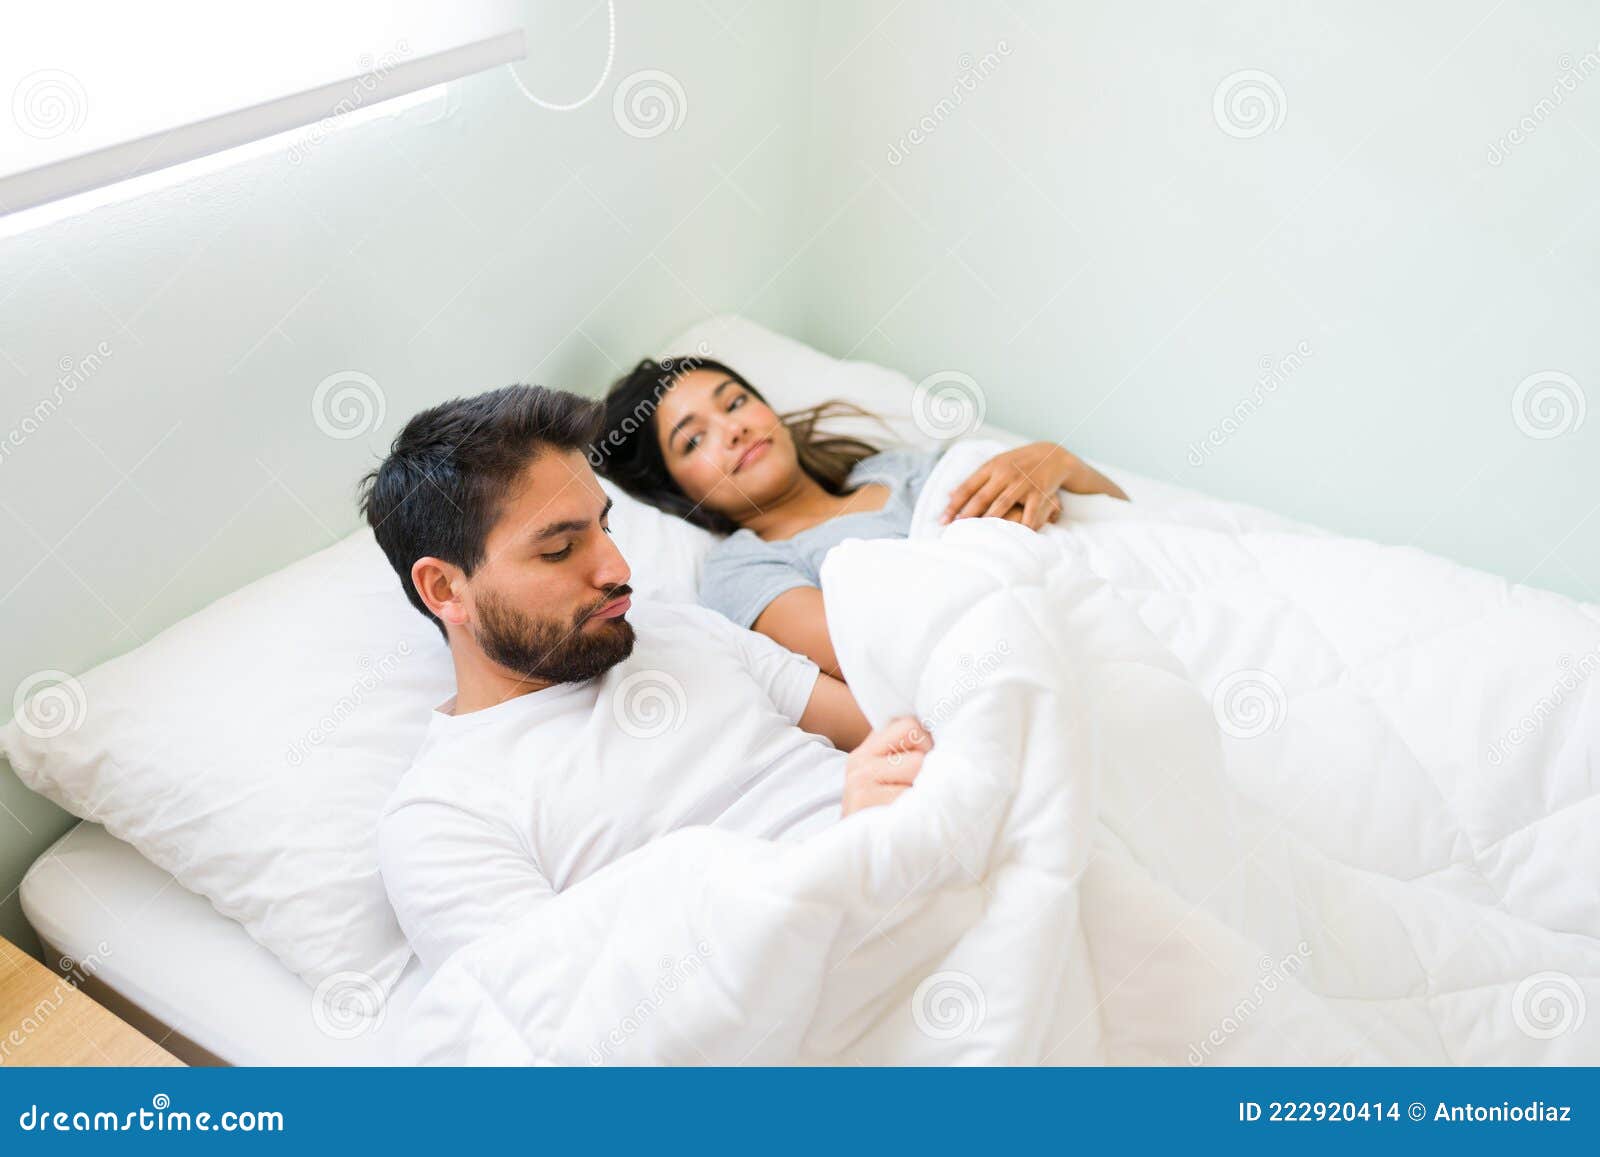 Sad Husband with Problems in the Bedroom Stock Photo picture picture